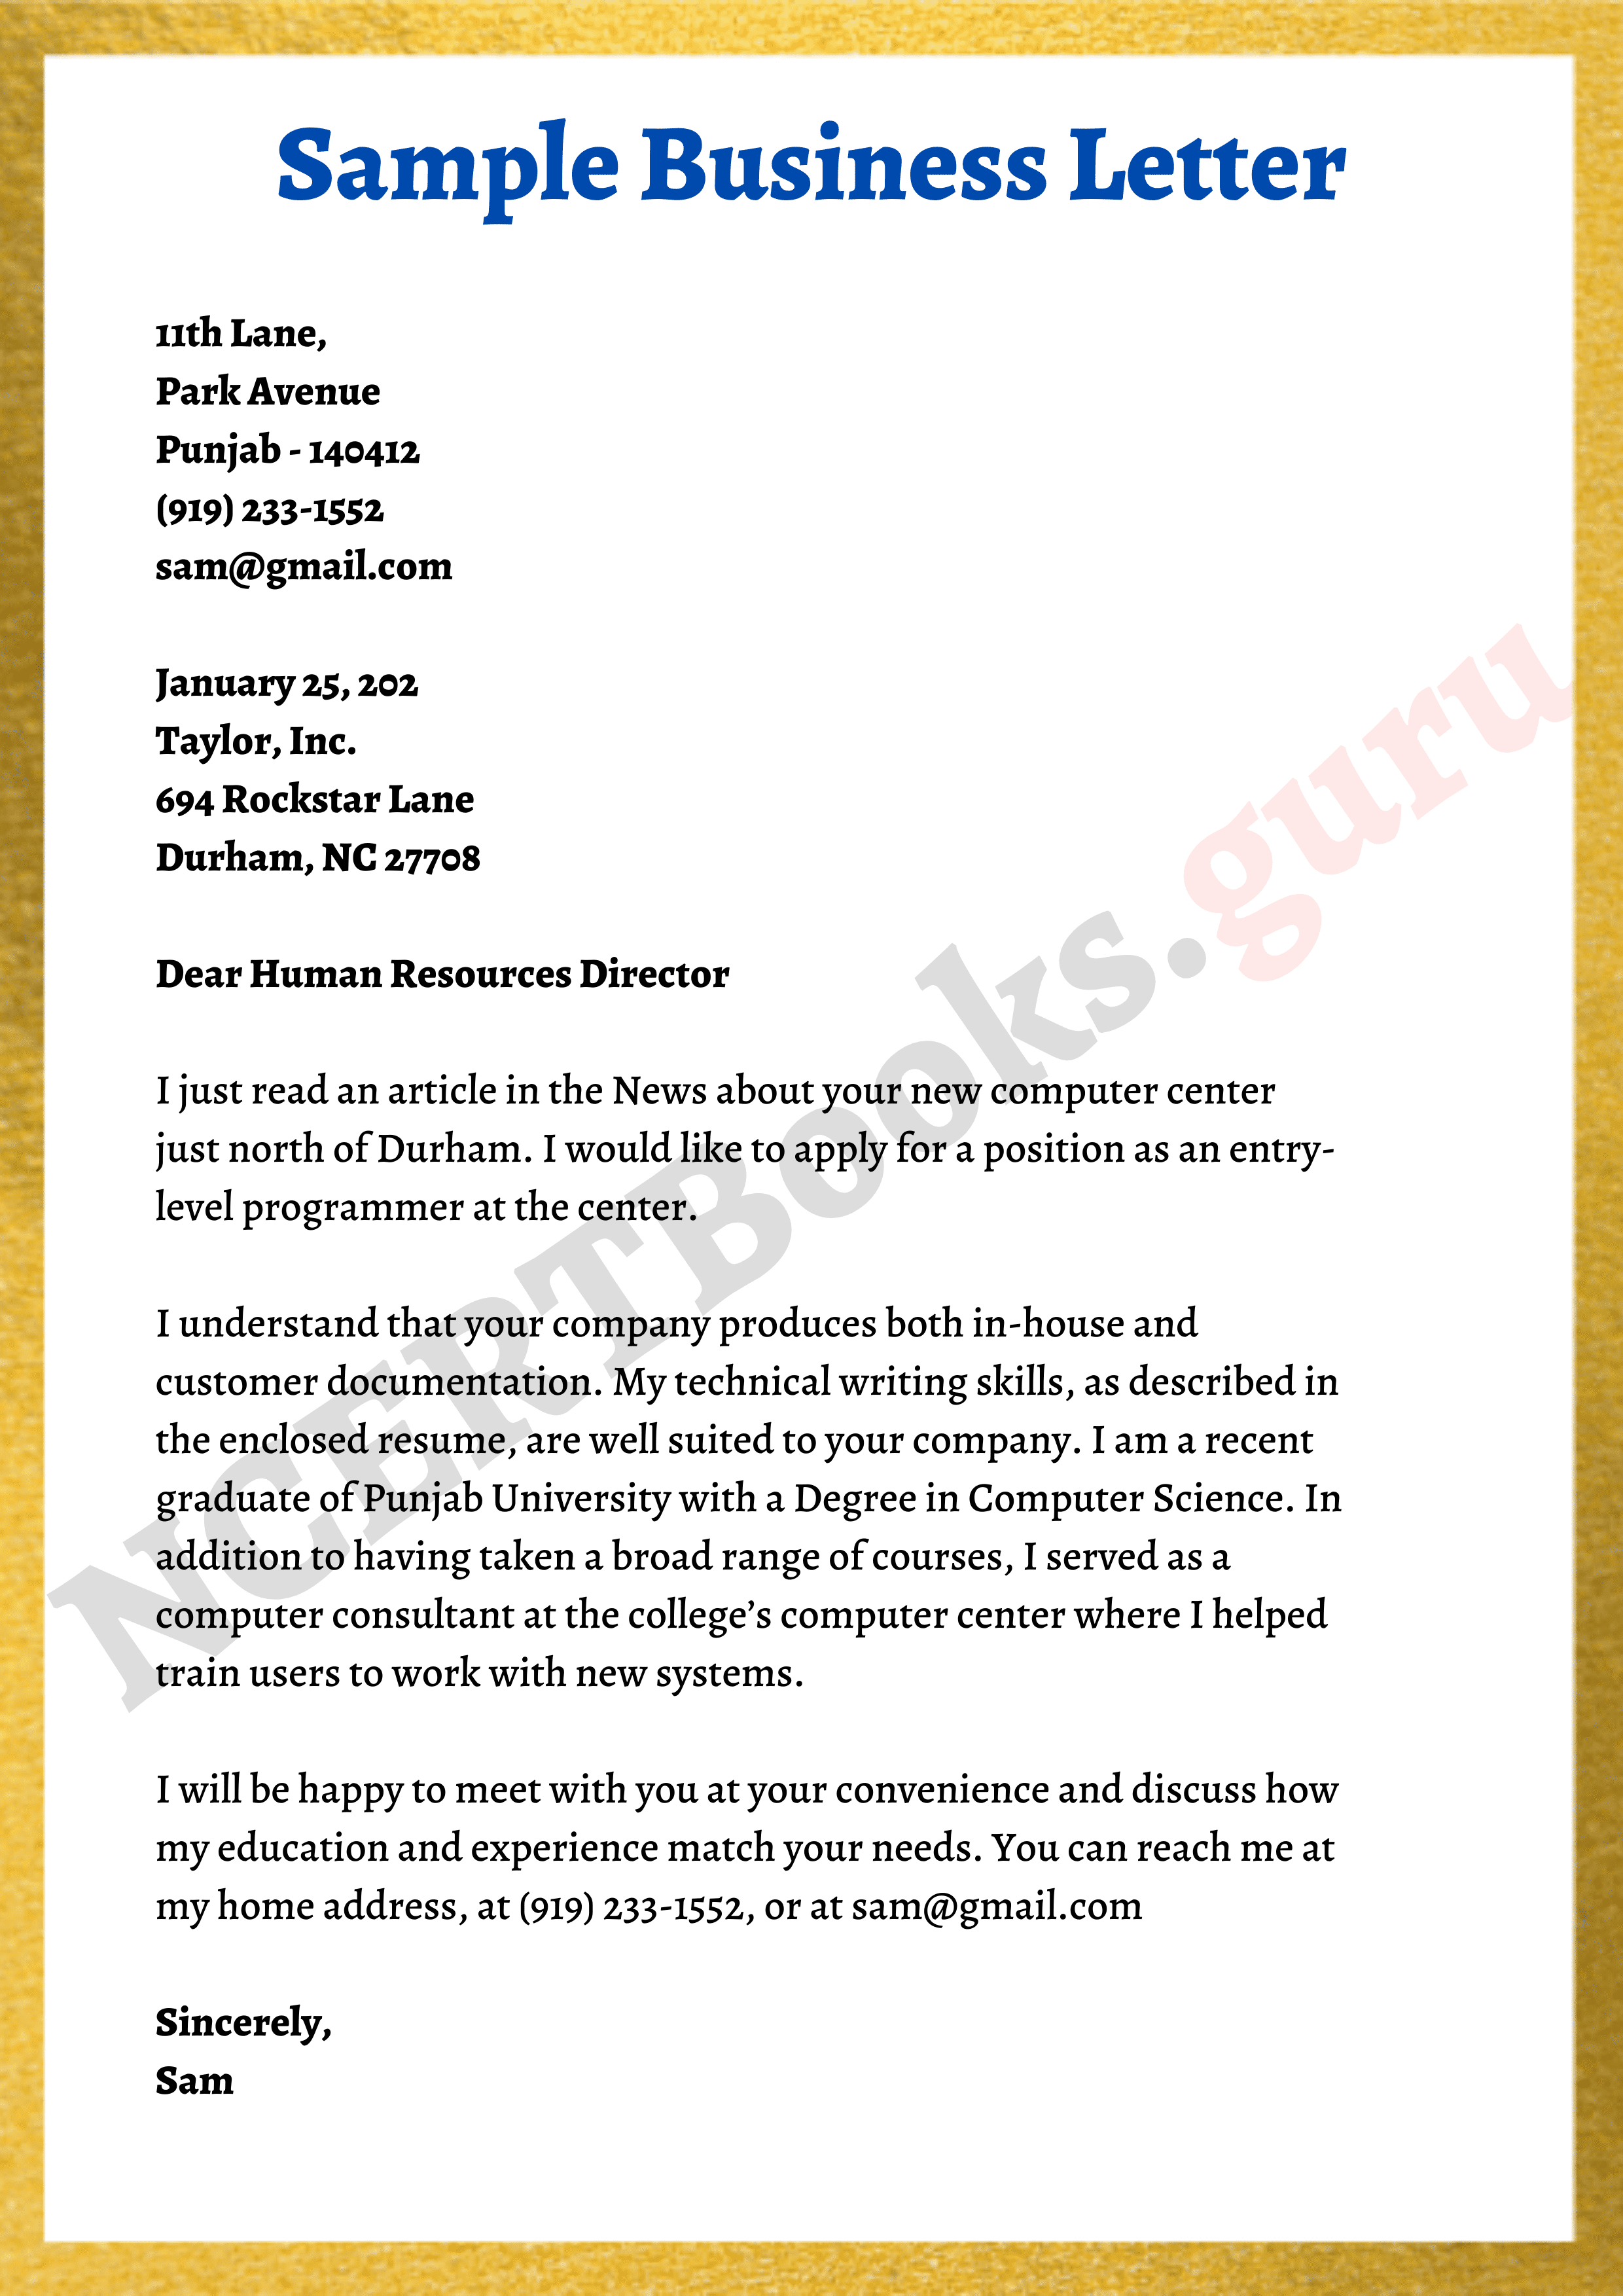 Business Letter Writing Examples